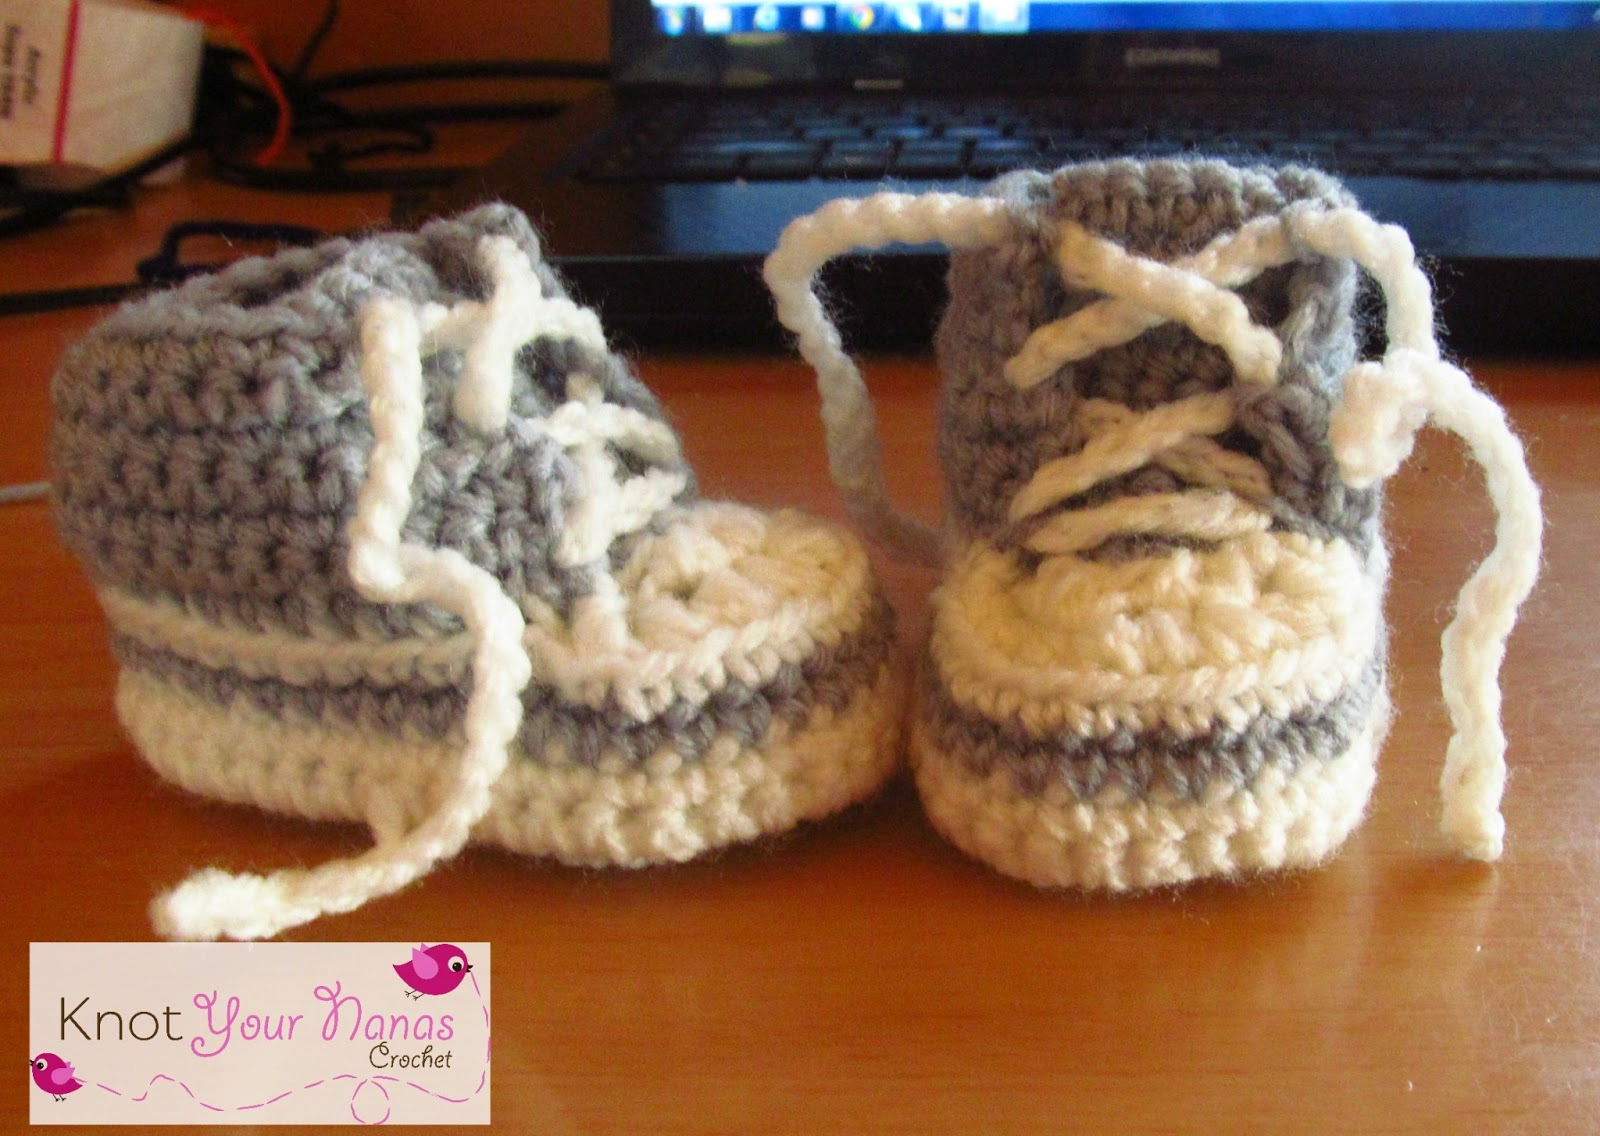 Baby Converse Crochet Pattern Knot Your Nanas Crochet Crochet Converse Newborn High Tops